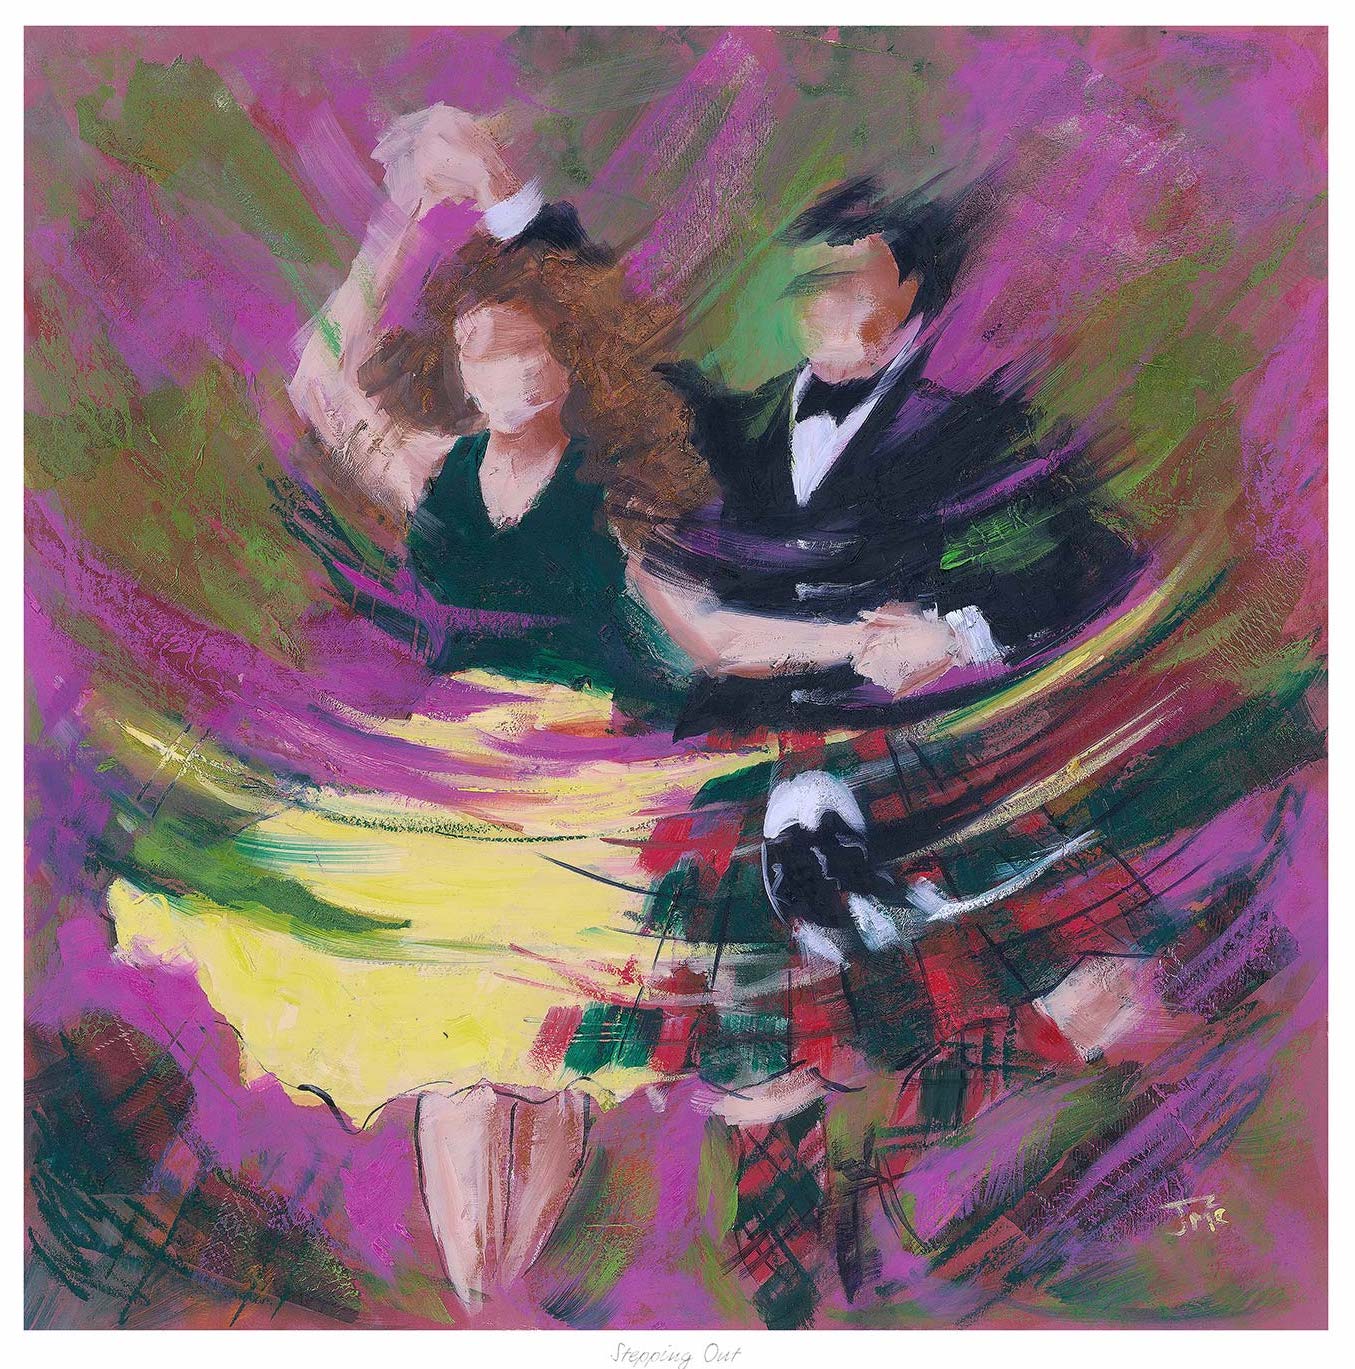 Stepping Out Ceilidh Dancing Art Print by Janet McCrorie